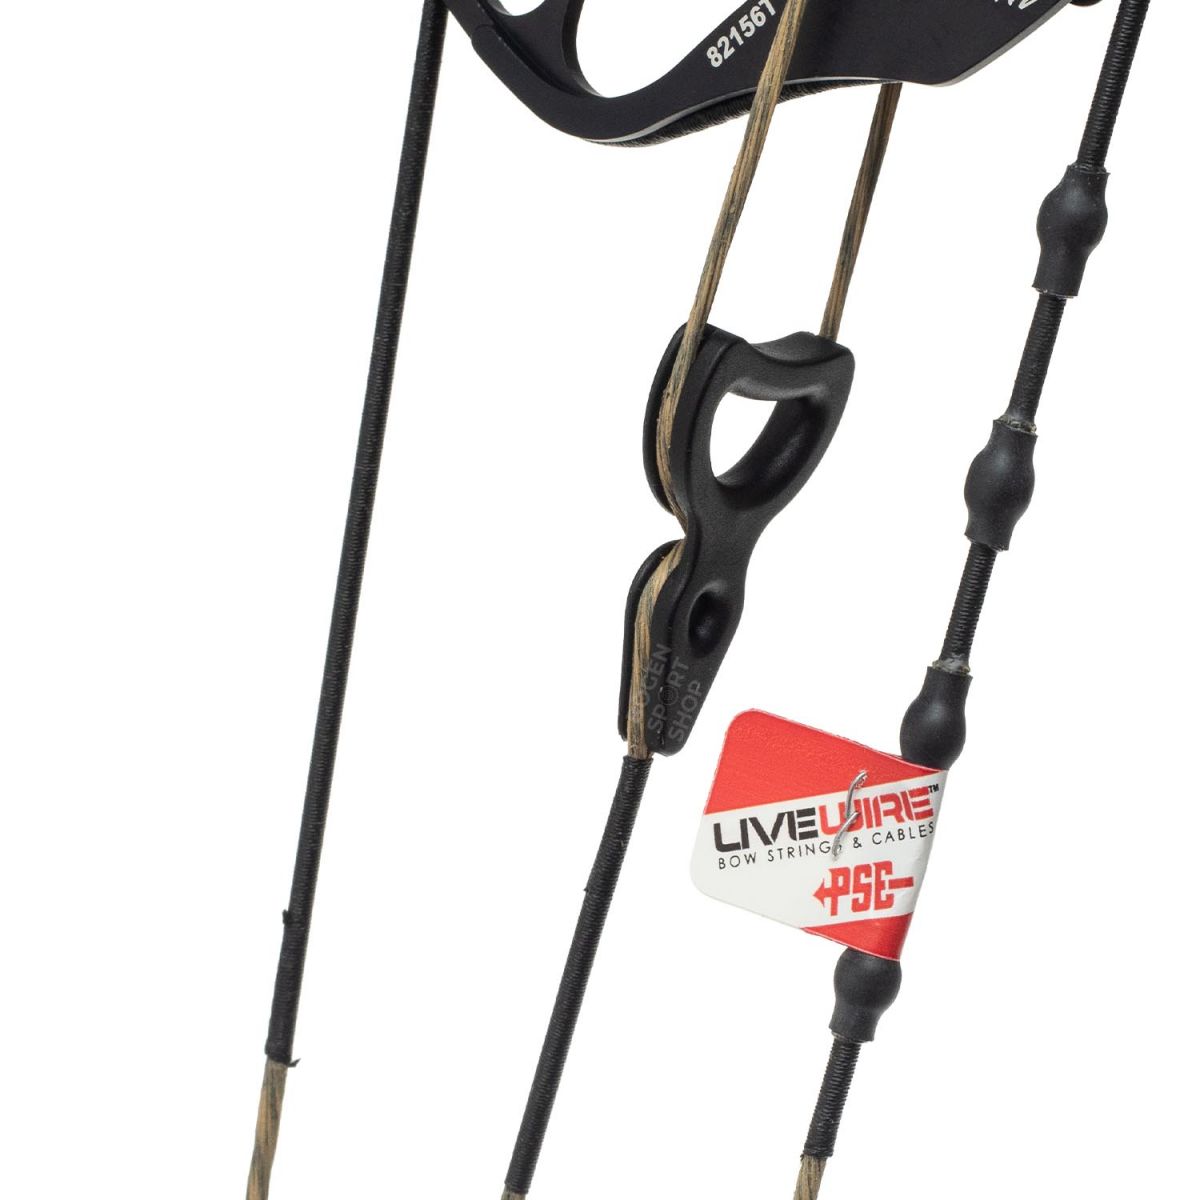  Buy PSE Compound Bow Drive NXT 2021 online